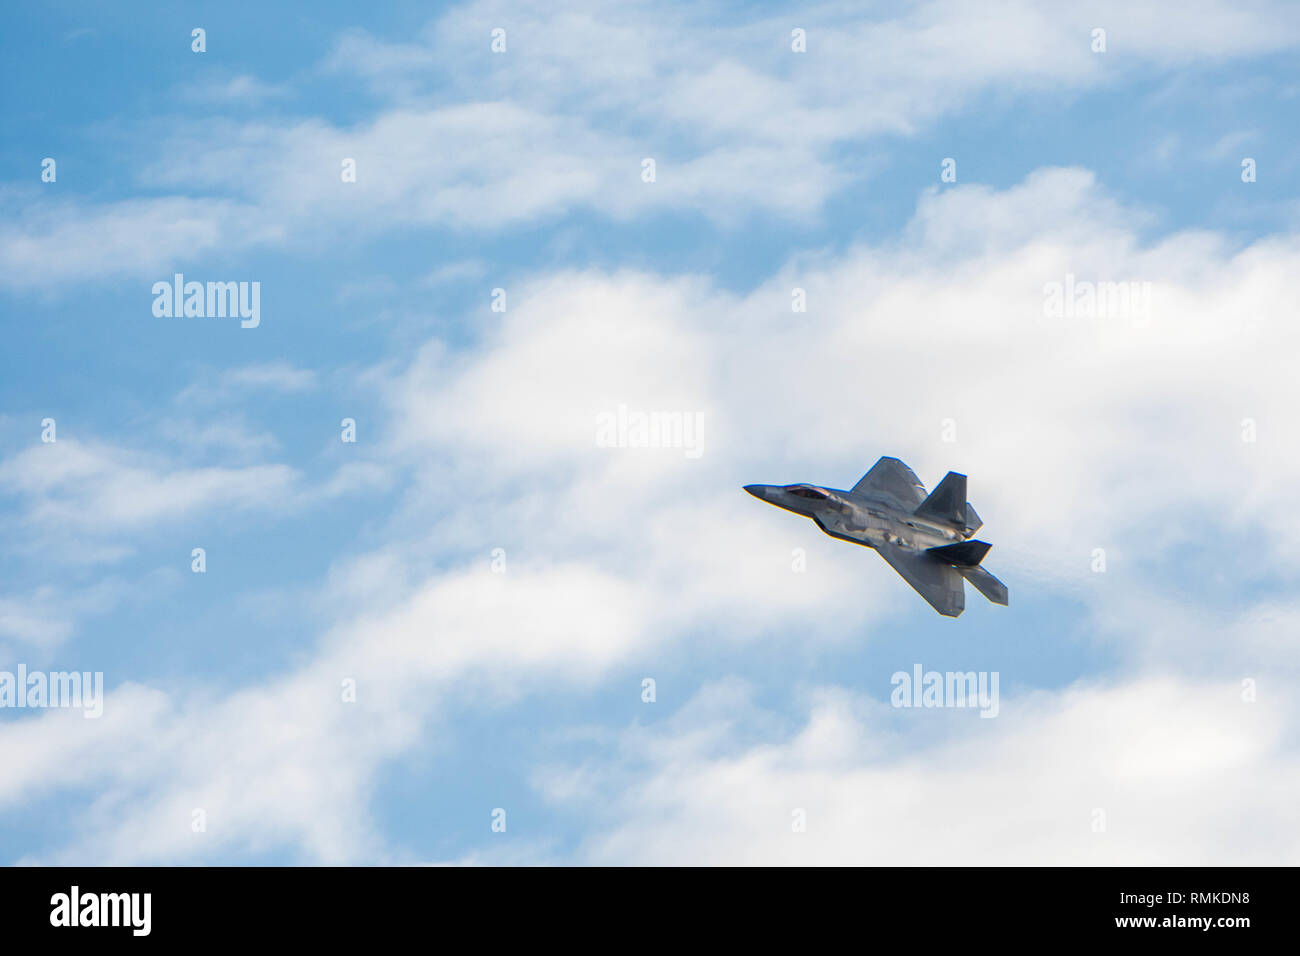 F-22 Demo Team pilot, Major 'Loco' Lopez performs during a demo team practice on Joint Base Langley-Eustis, February 13th, 2019.The team performs precision aerial maneuvers to showcase the capabilities of the F-22 Raptors, as well as educate the public about the 5th generation aircraft. Stock Photo